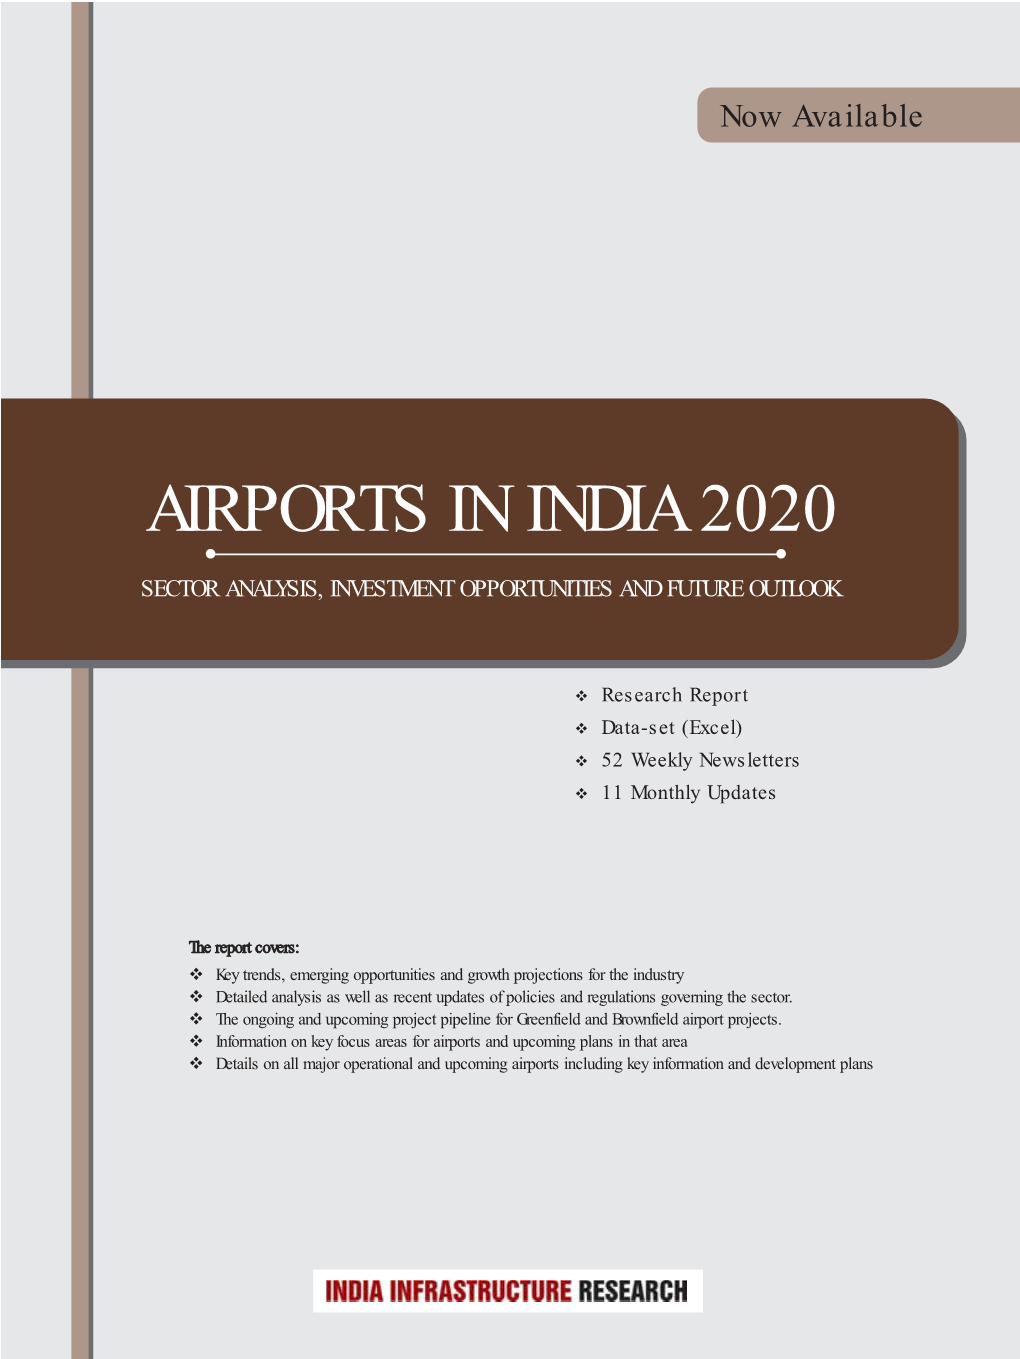 Airports in India 2020